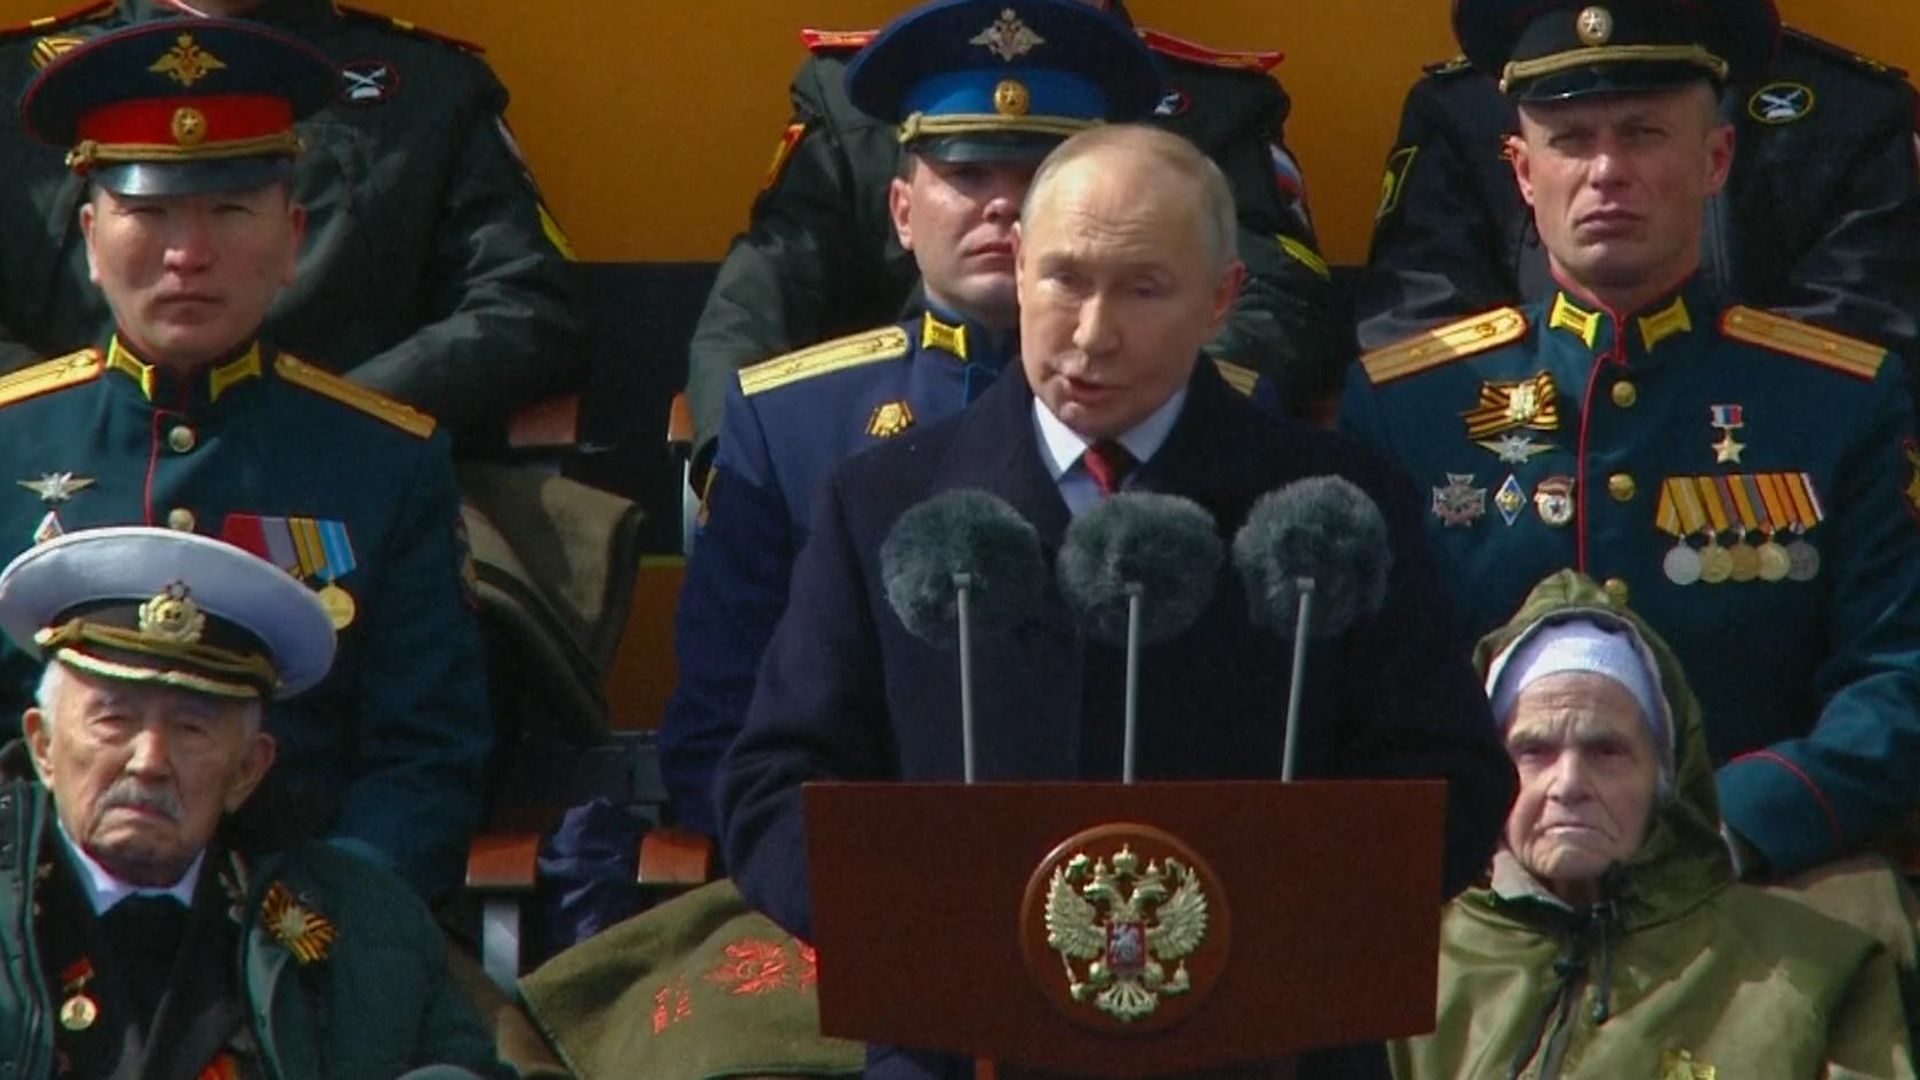 'Combat forces always ready', says Putin at Victory Day parade